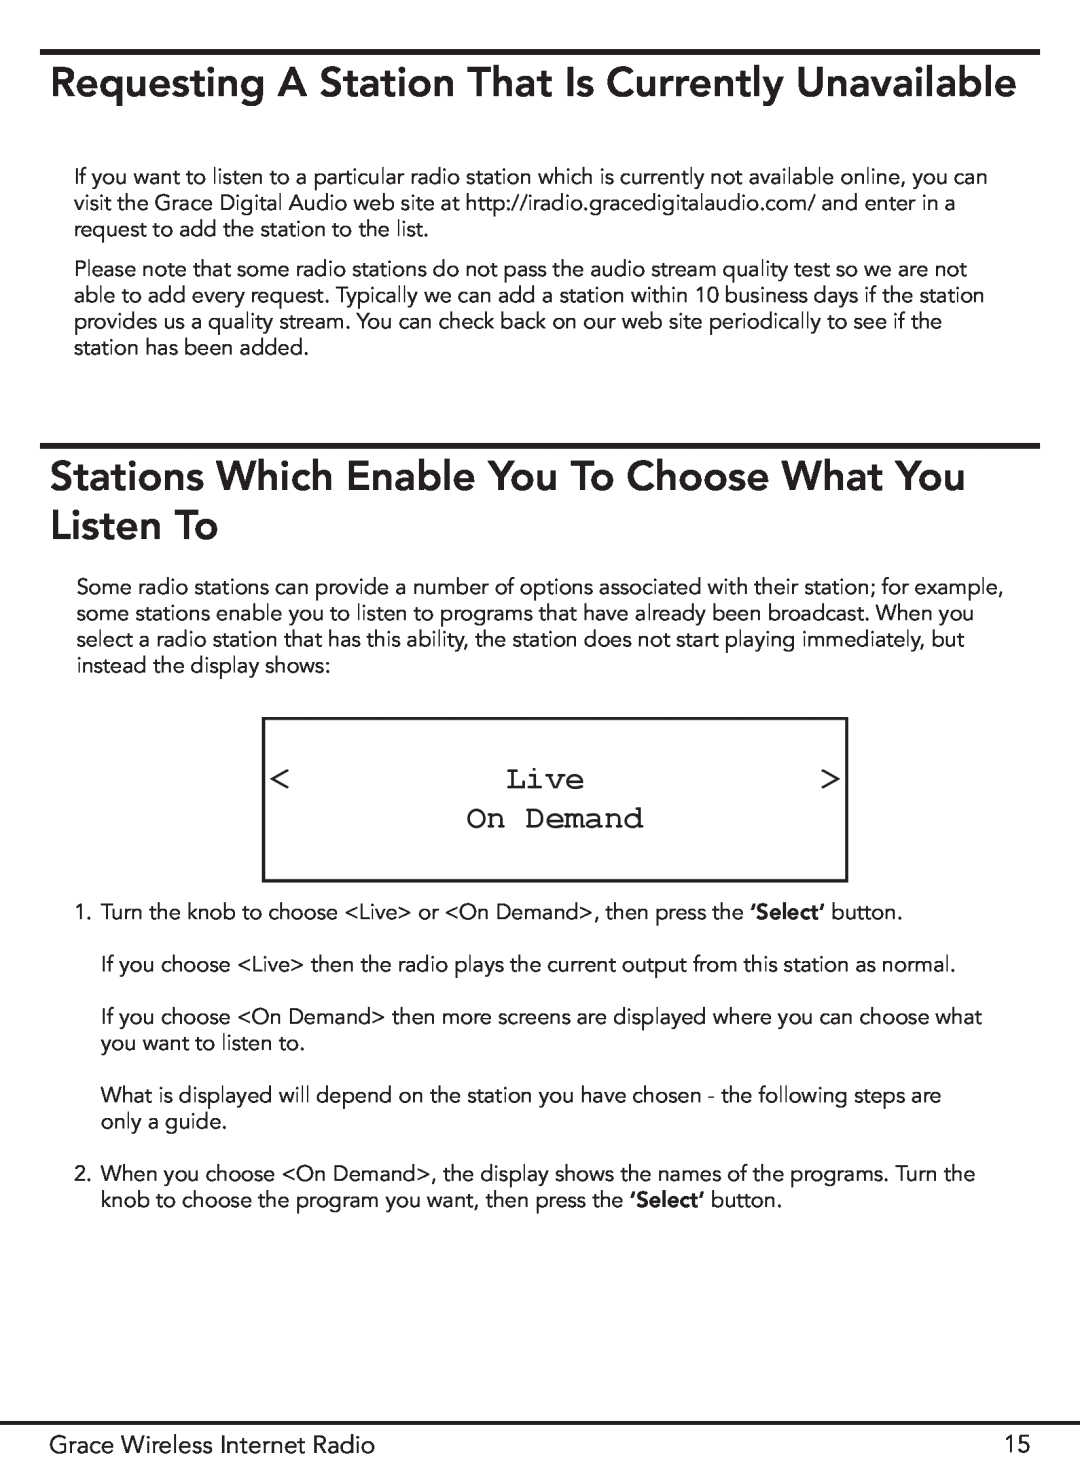 Grace GDI-IR2000 manual Requesting A Station That Is Currently Unavailable, Live, On Demand, Grace Wireless Internet Radio 